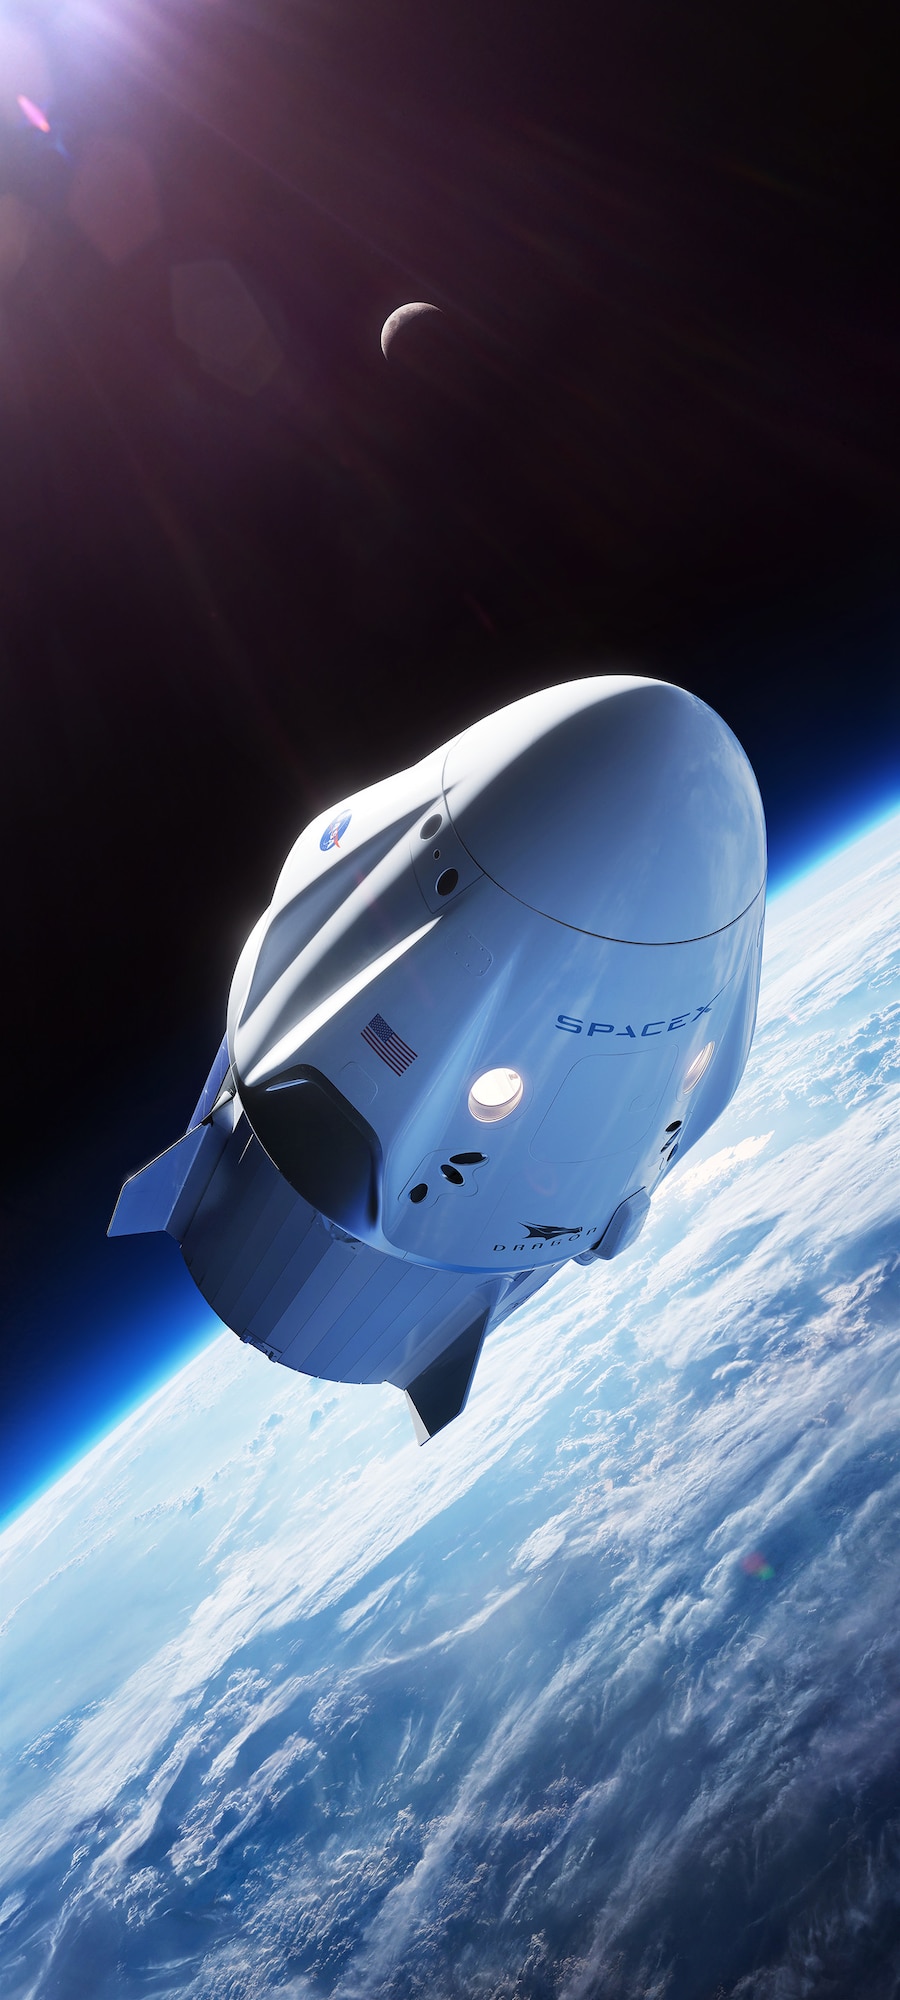 In this illustration, a SpaceX Crew Dragon spacecraft is shown in low-Earth orbit. NASA is partnering with Boeing and SpaceX to build a new generation of human-rated spacecraft capable of taking astronauts to the International Space Station and expanding research opportunities in orbit. SpaceX's upcoming Demo-1 flight test is part of NASA’s Commercial Crew Transportation Capability contract with the goal of returning human spaceflight launch capabilities to the United States.